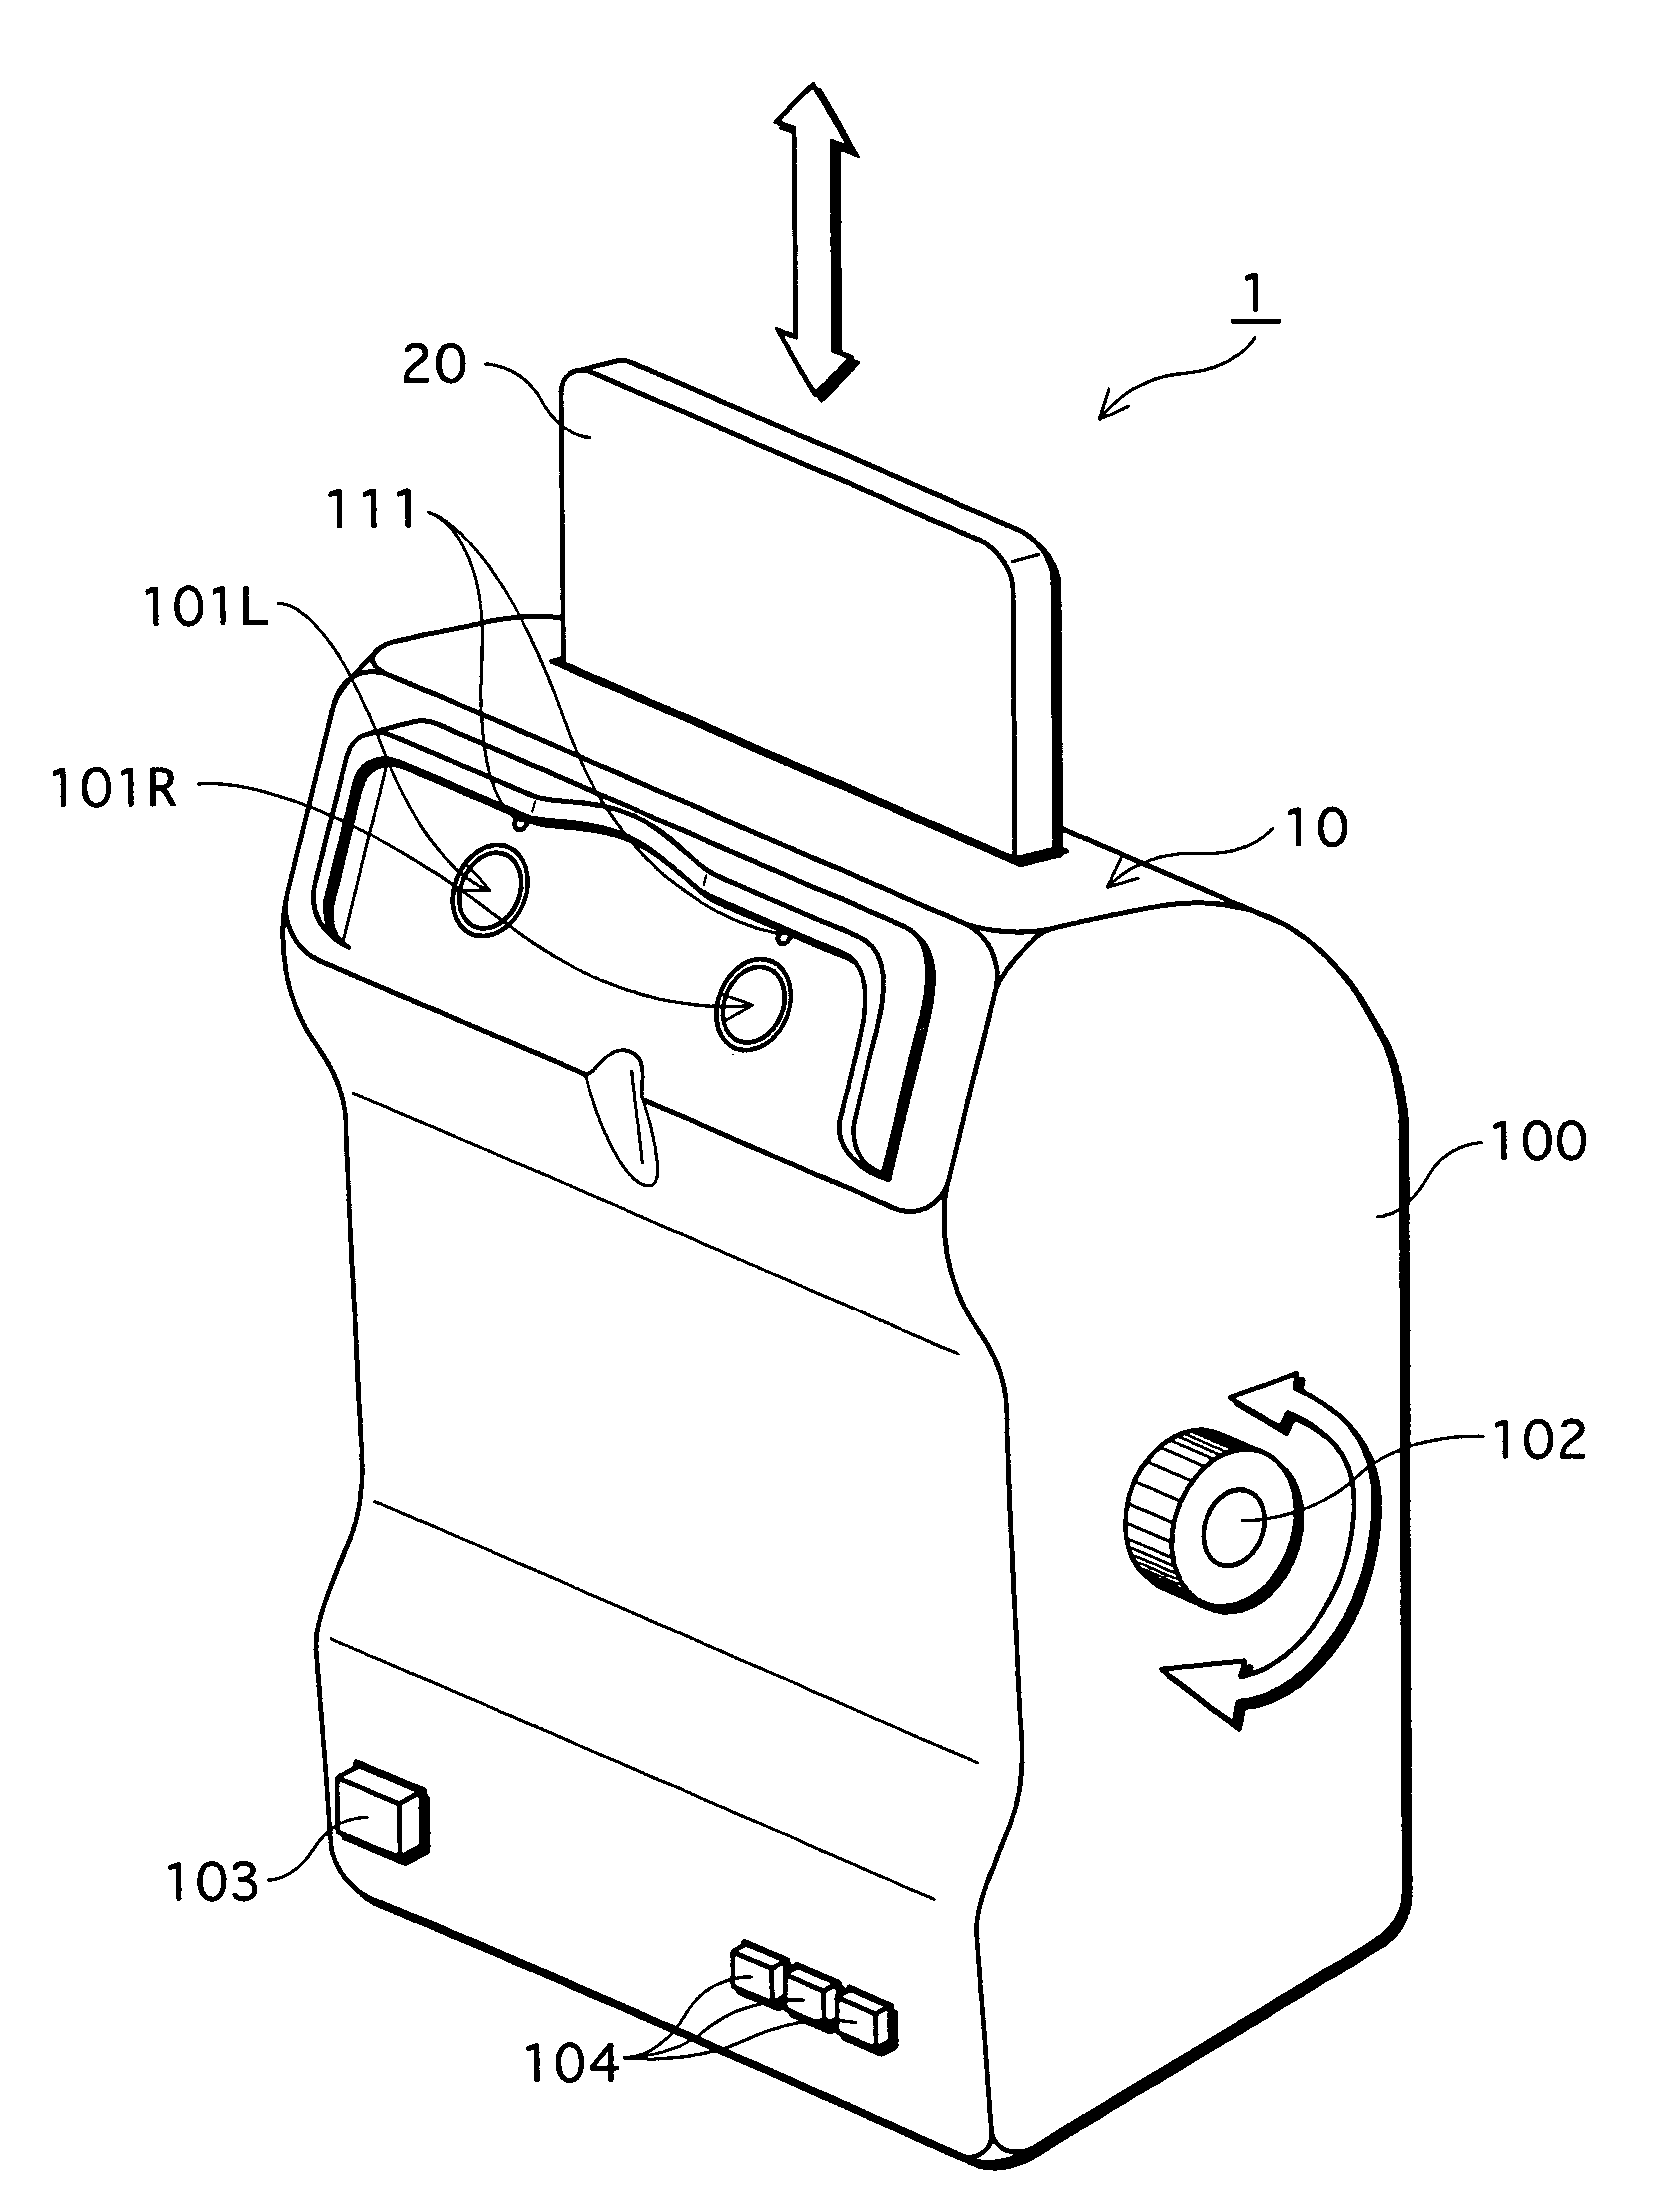 Pupil reaction ascertaining device and fatigue recovery promoting device